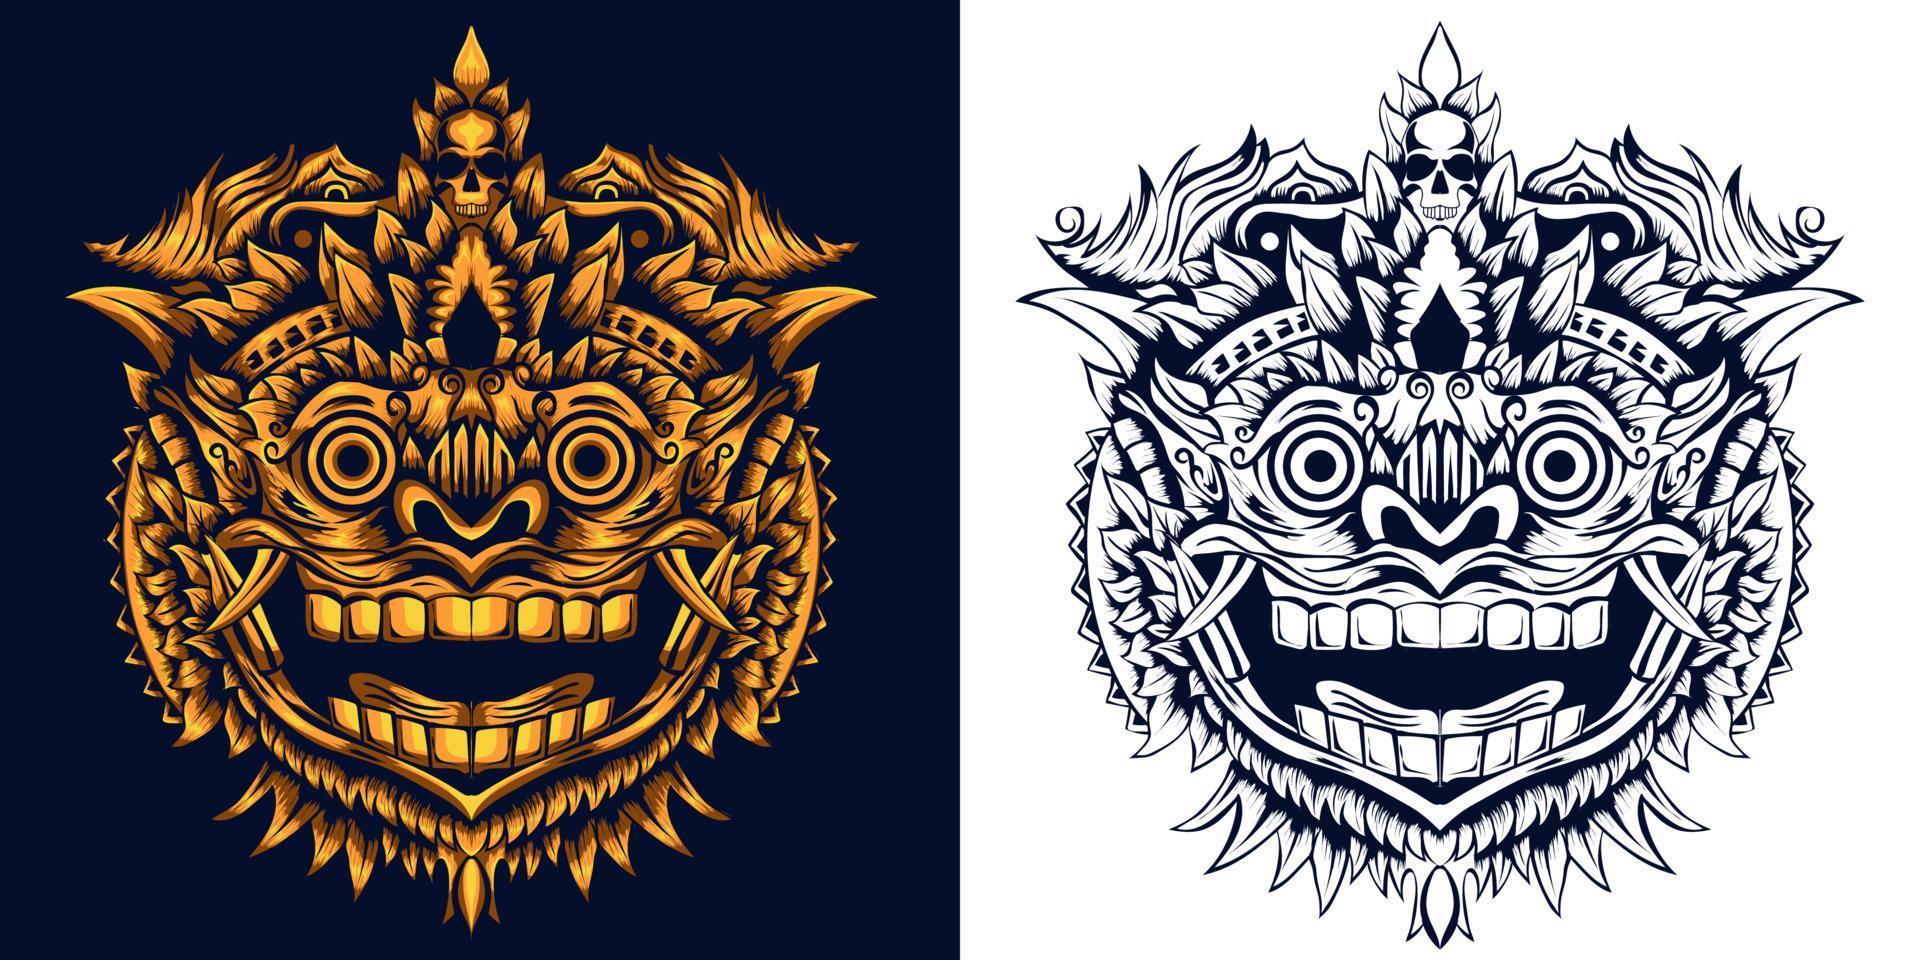 Illustration Vector Graphic of Balinese Barong. Perfect for T-shirt design, Merchandise, etc